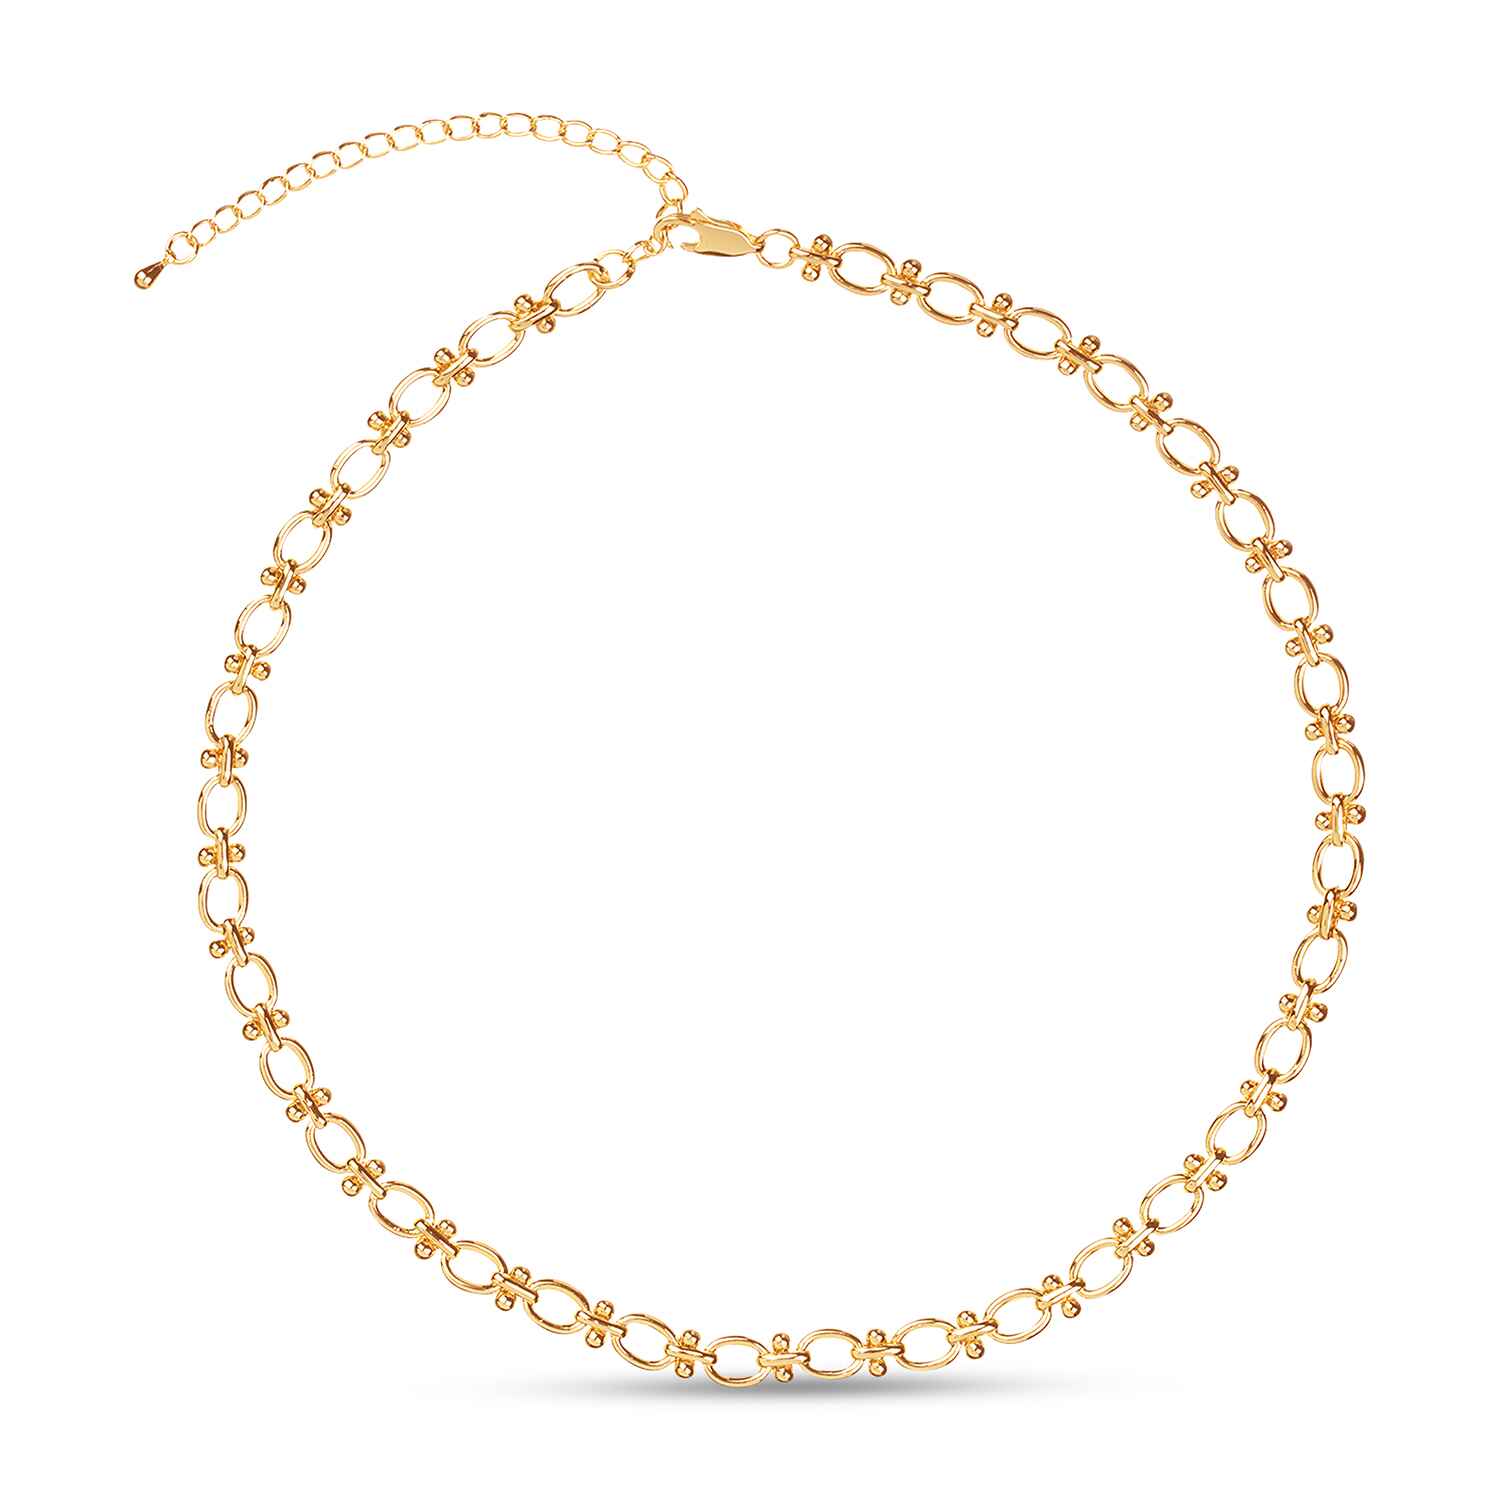 The Gia Gold Chain Necklace is "the" chain. The well-rounded, gets-along-with-every-look type of sustainable jewellery. Plus, you can wear it two ways—let it shine on its own or as an everyday base to stack your favorite charms.